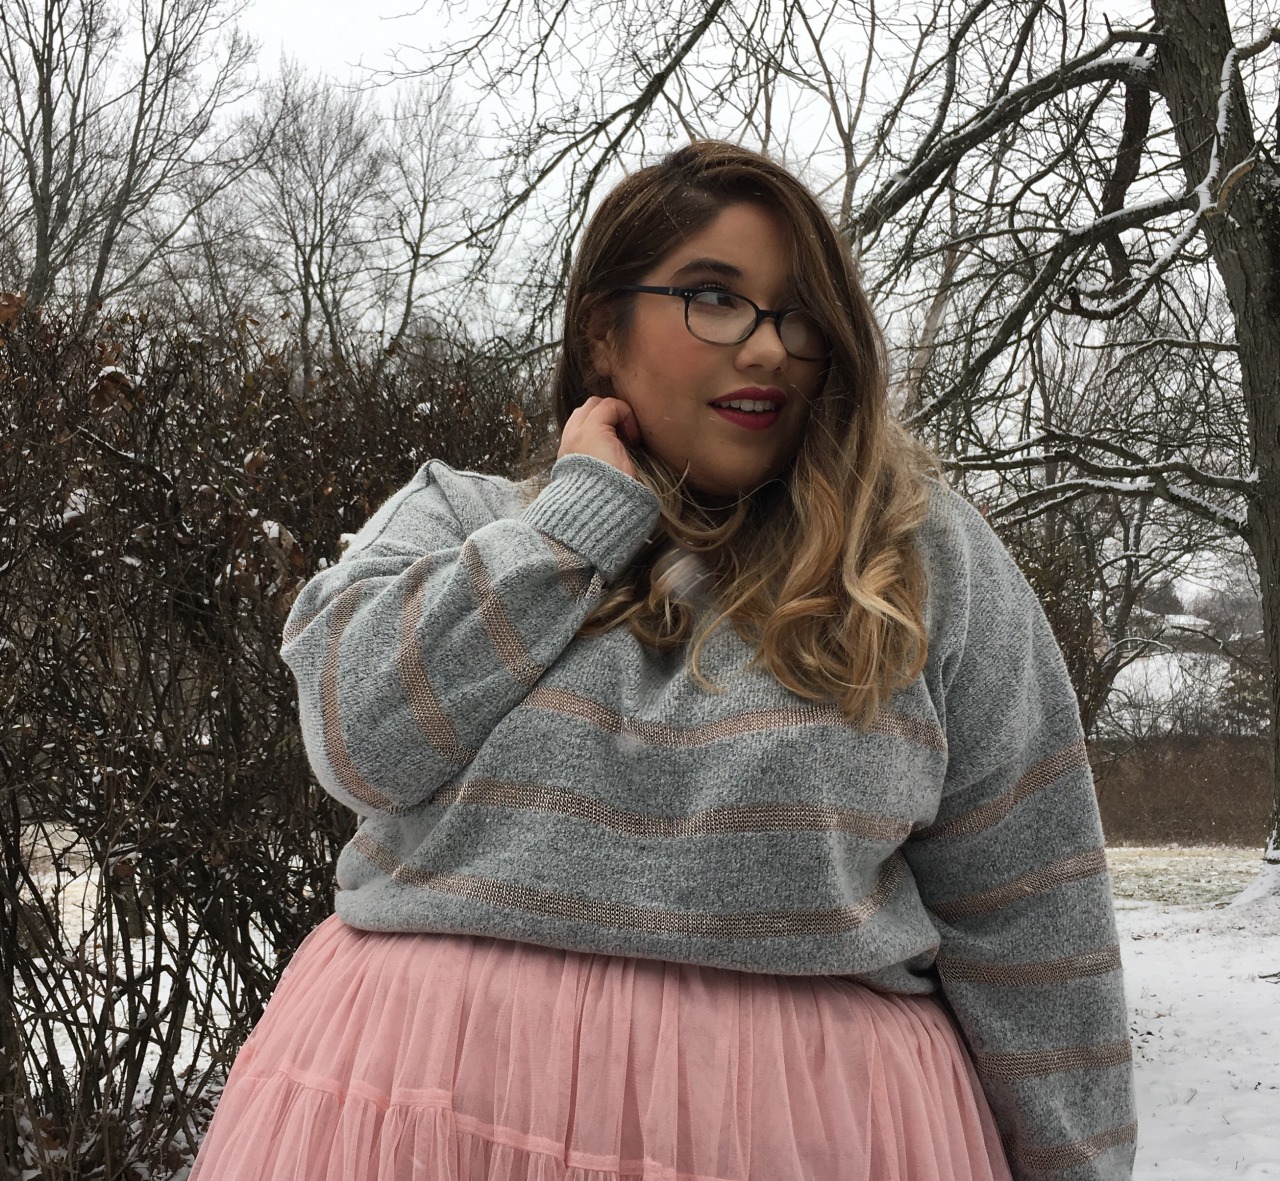 lizzies-looks:First outfit of the day of 2017! The sweater and skirt are from Lane